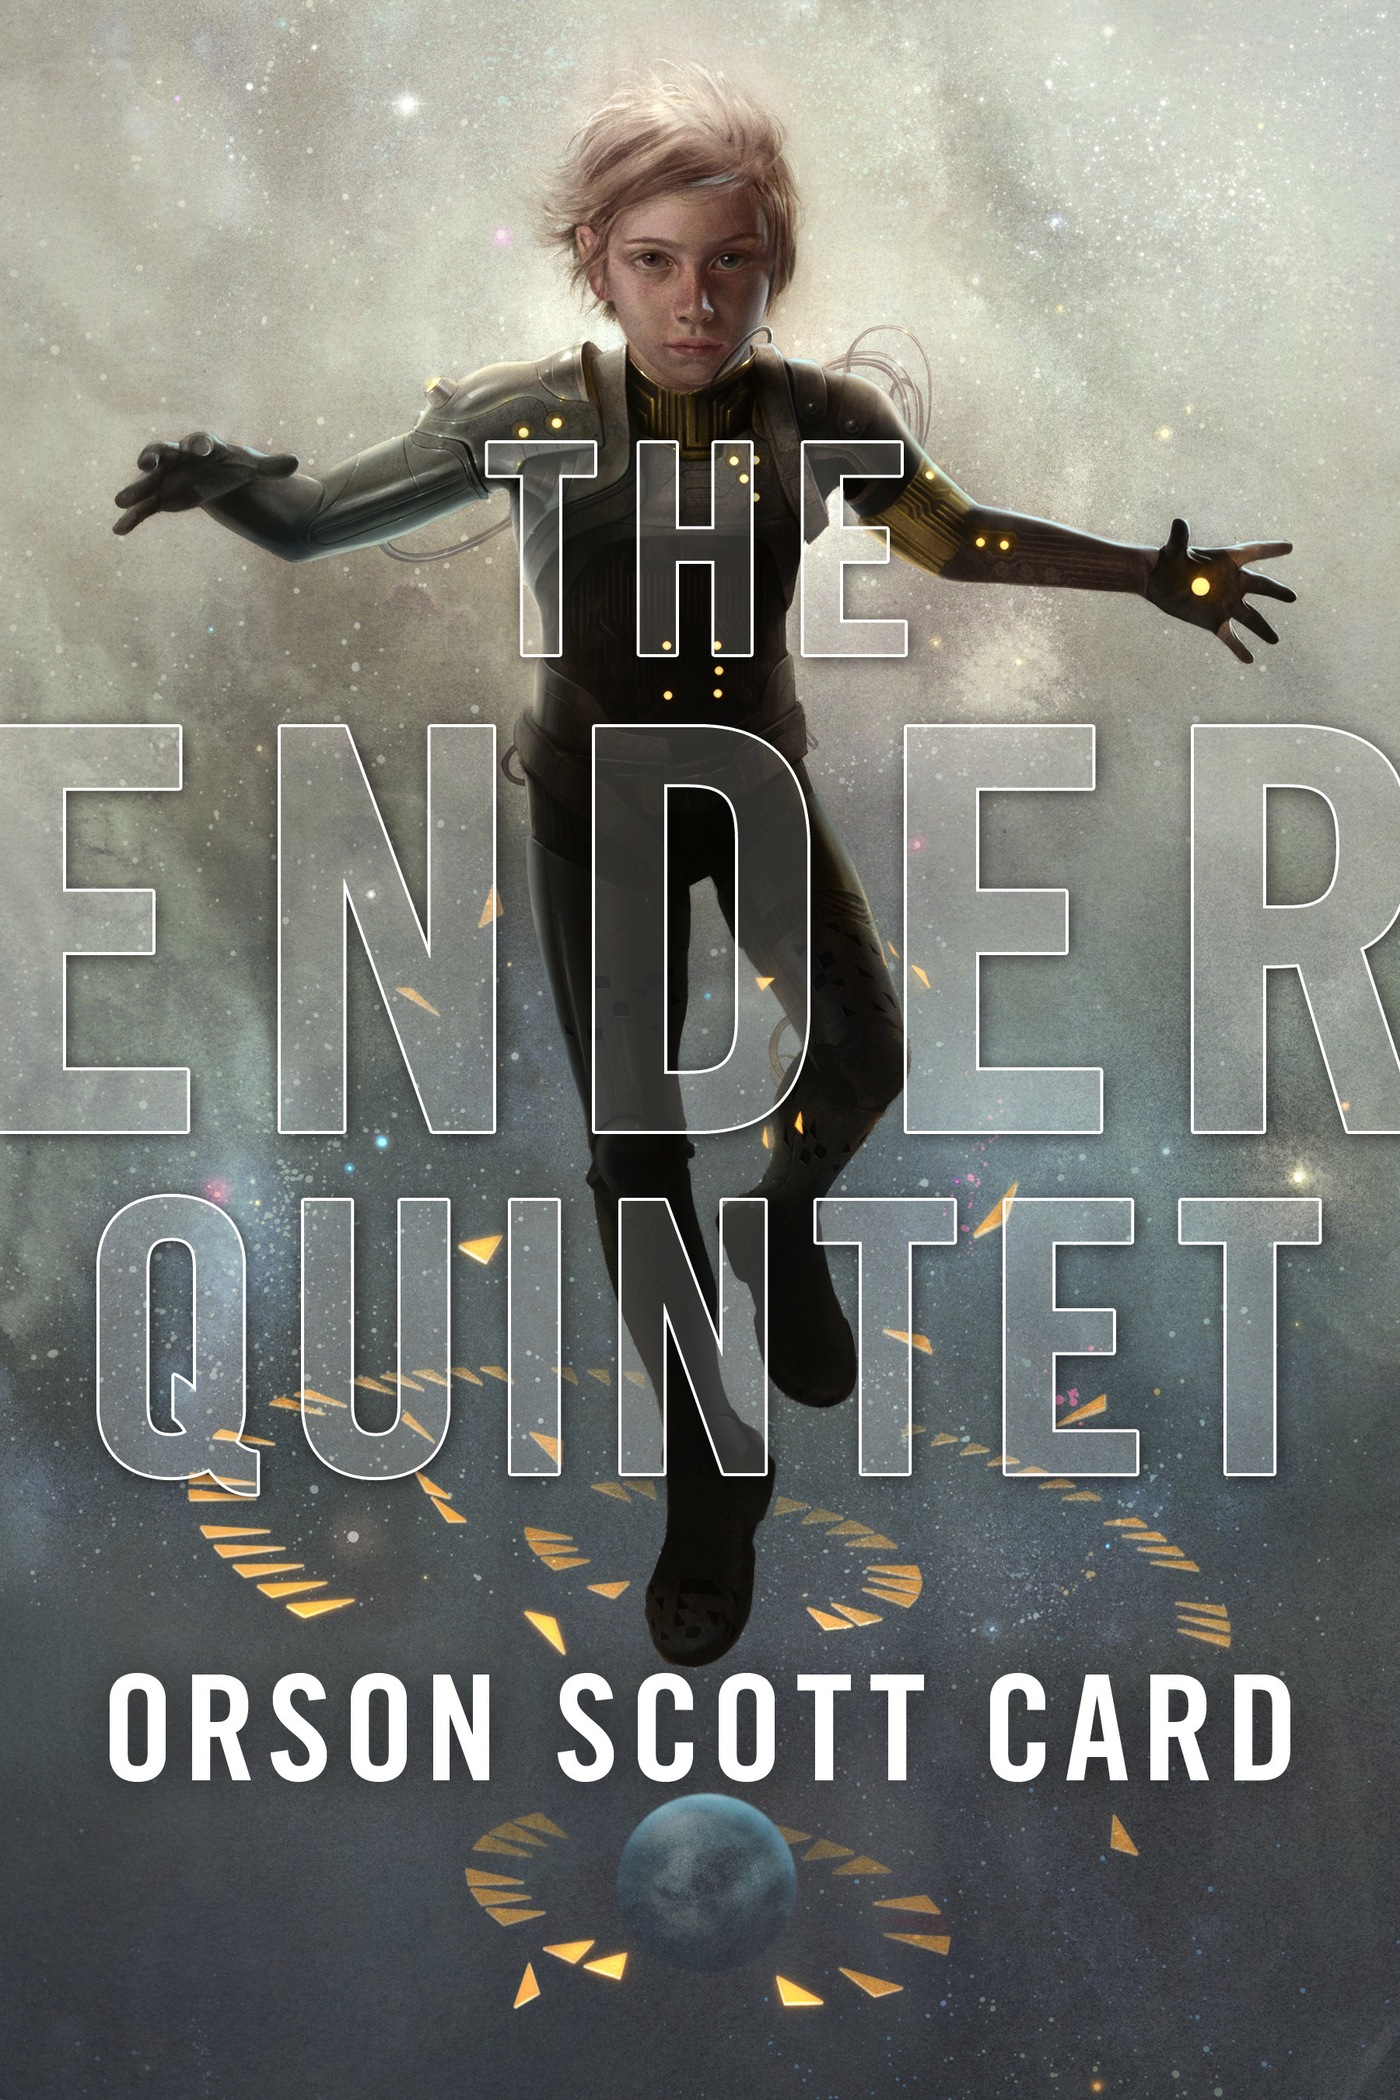 The Ender Quintet : Ender's Game, Speaker for the Dead, Xenocide, Children of the Mind, and Ender in Exile by Orson Scott Card